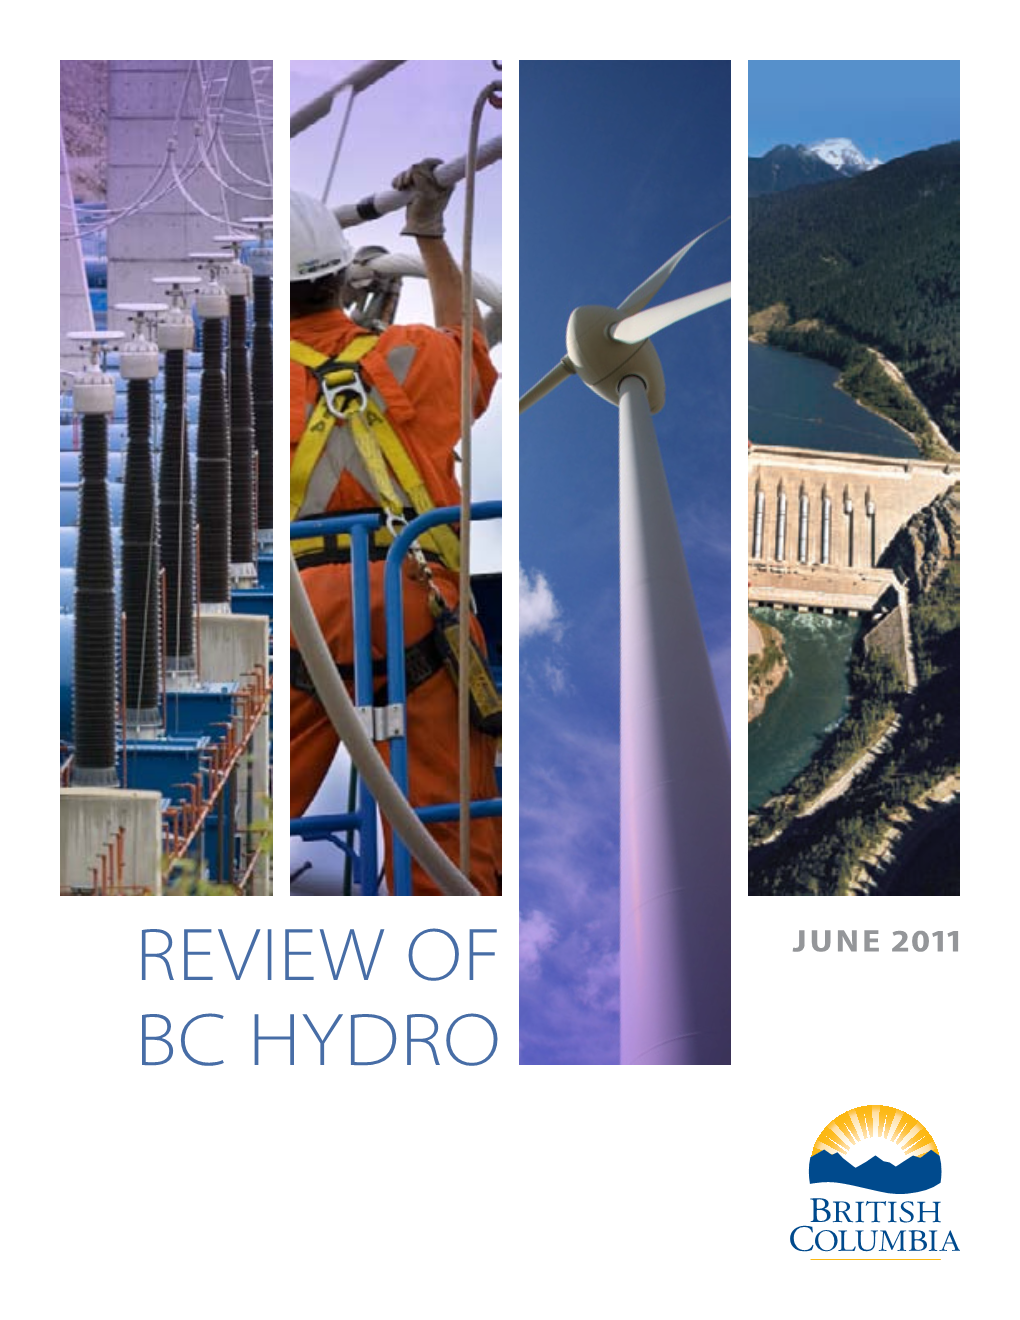 Review of BC Hydro